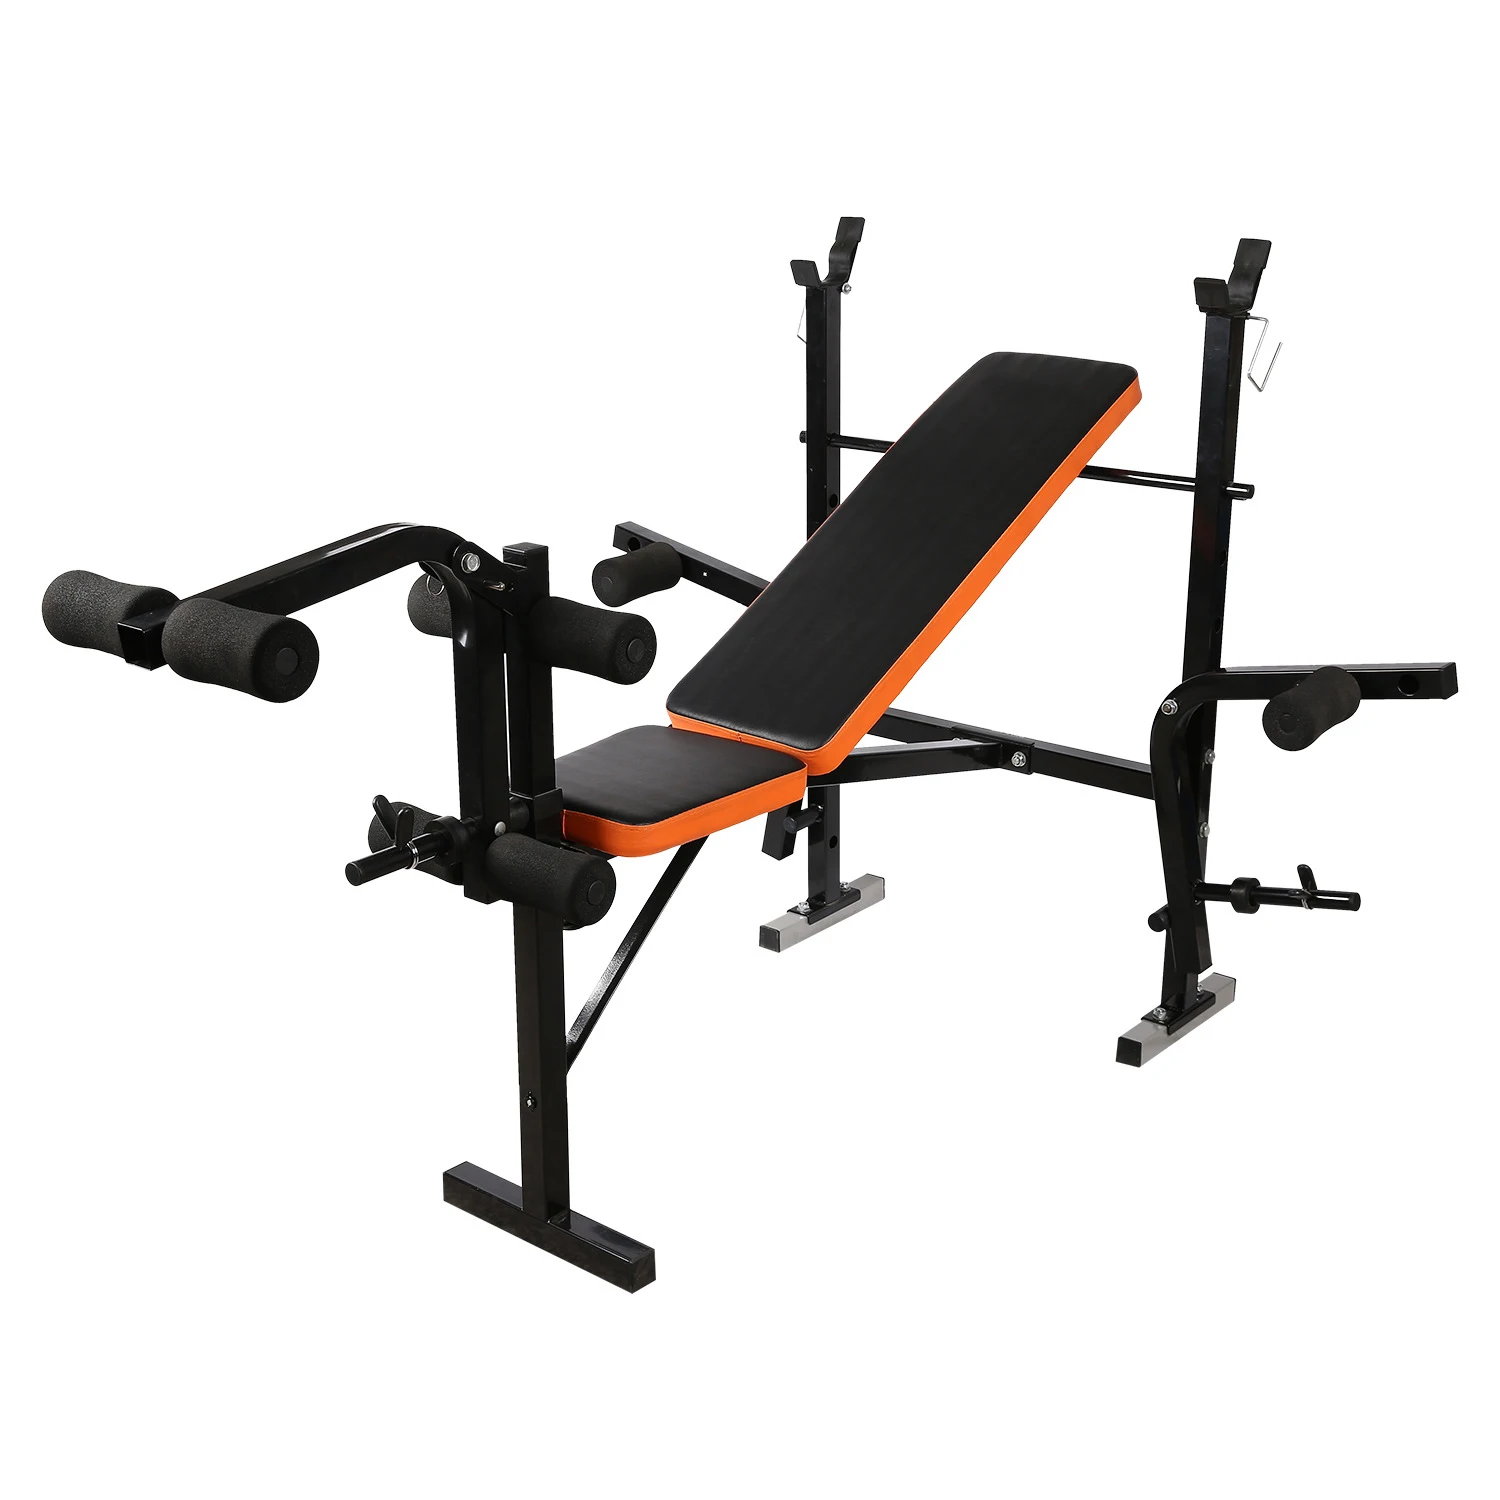 Universal Combine Barbell Rack Soft Cushion Body Building Gym Equipment Folding Dumbbell Weight Bench Buy Folding Weight Bench